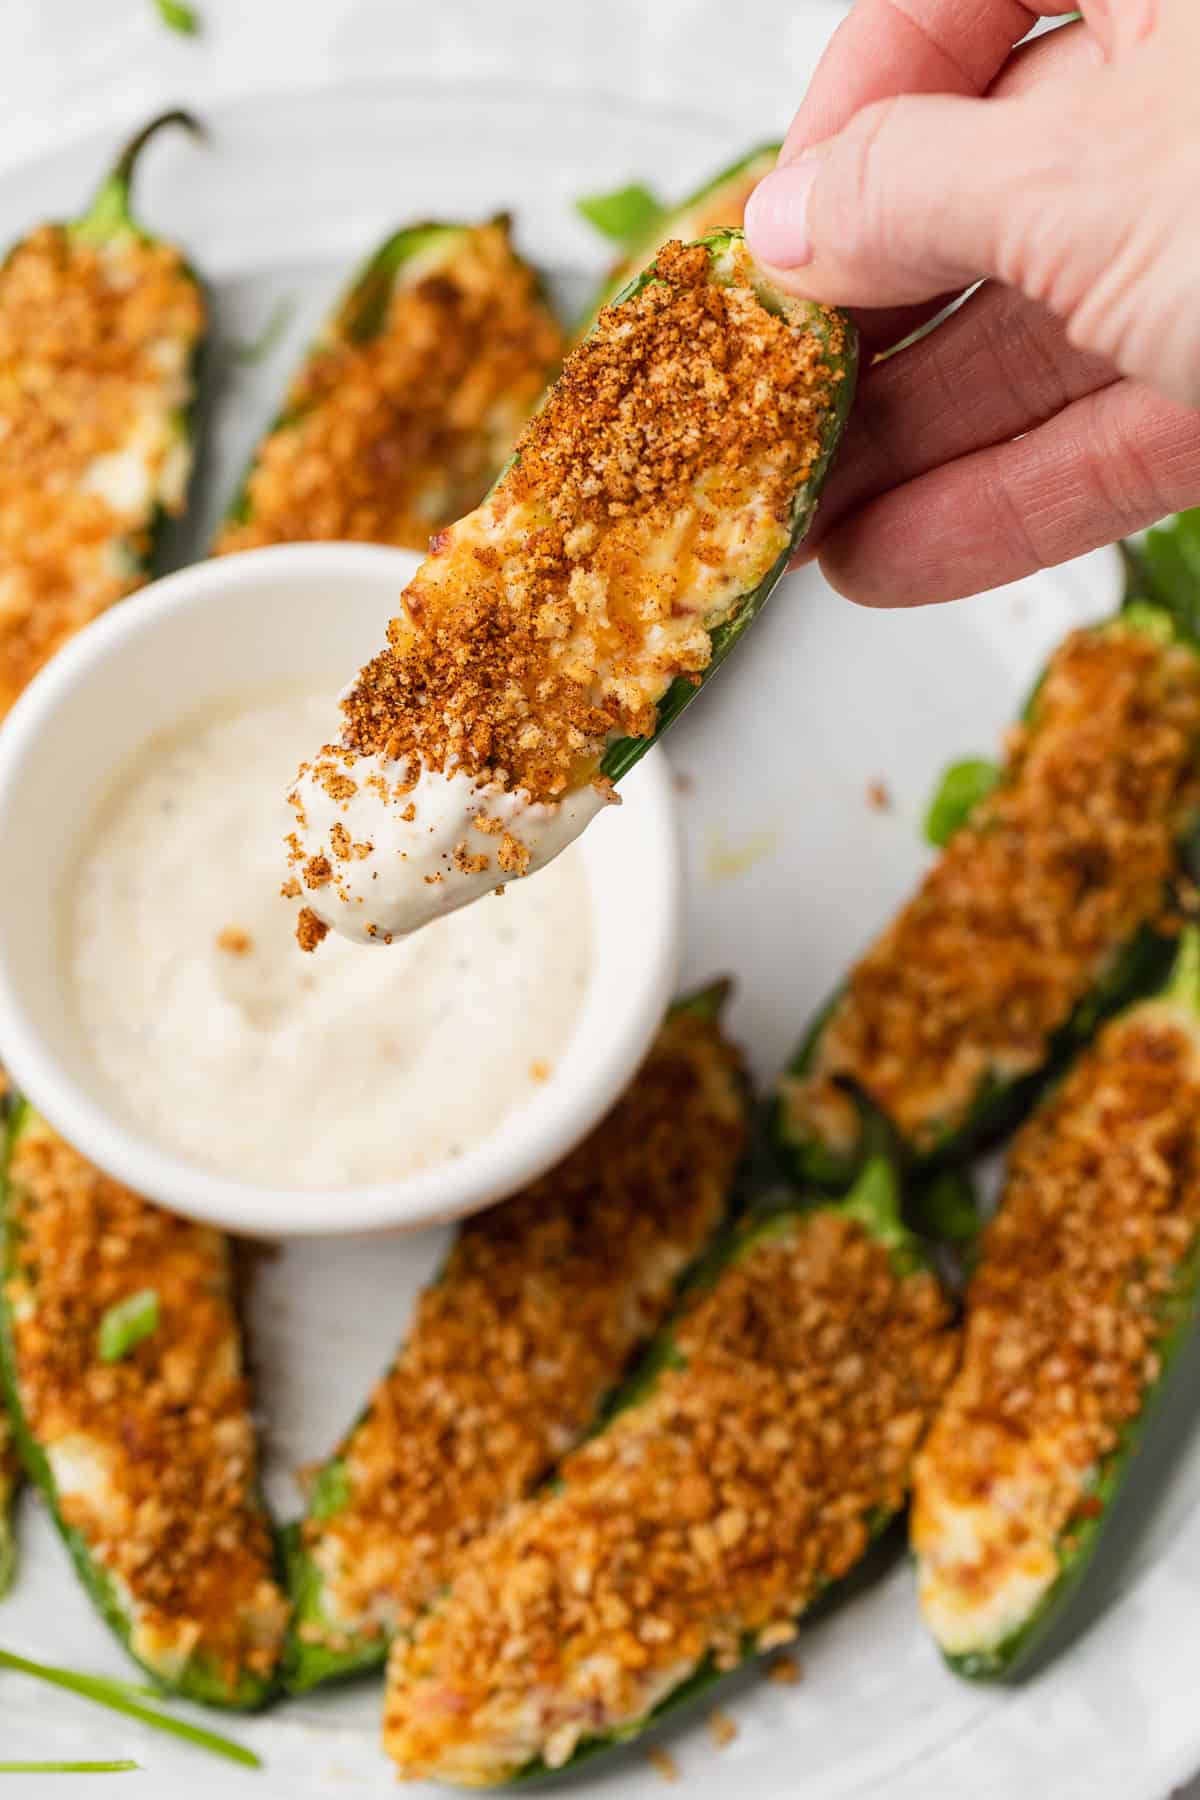 Dipping the jalapenos into ranch dressing.